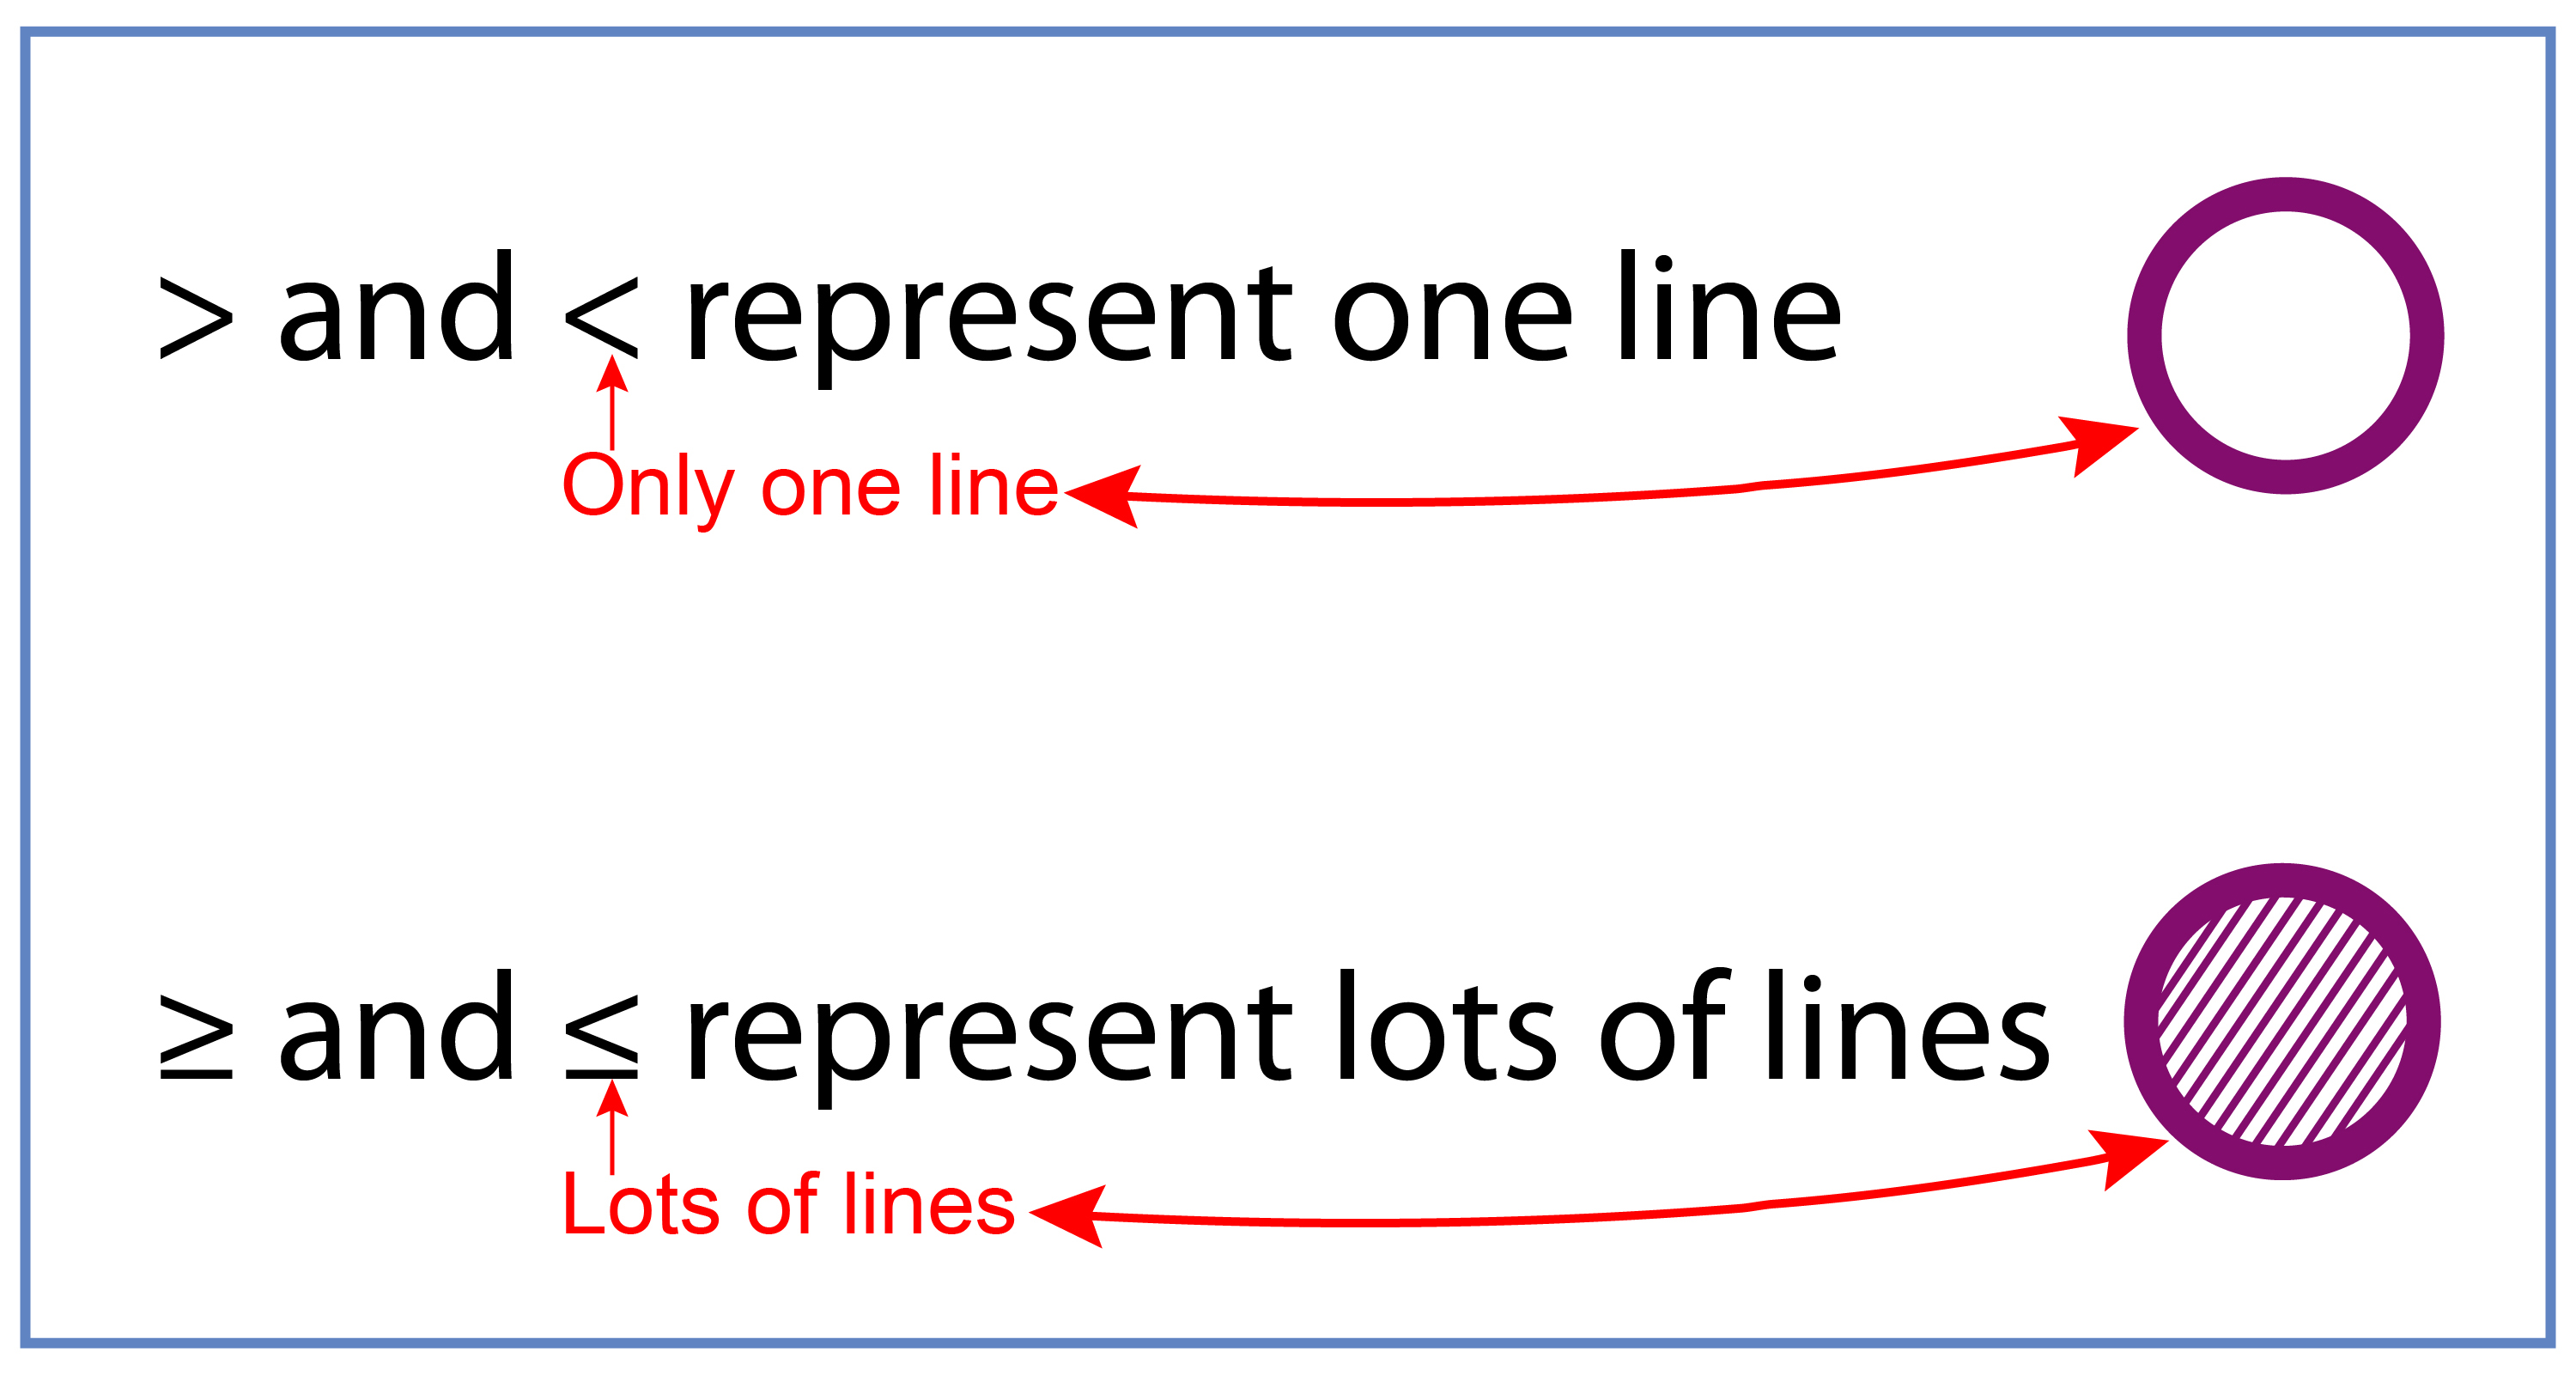 Inequalities can be represented on a number line